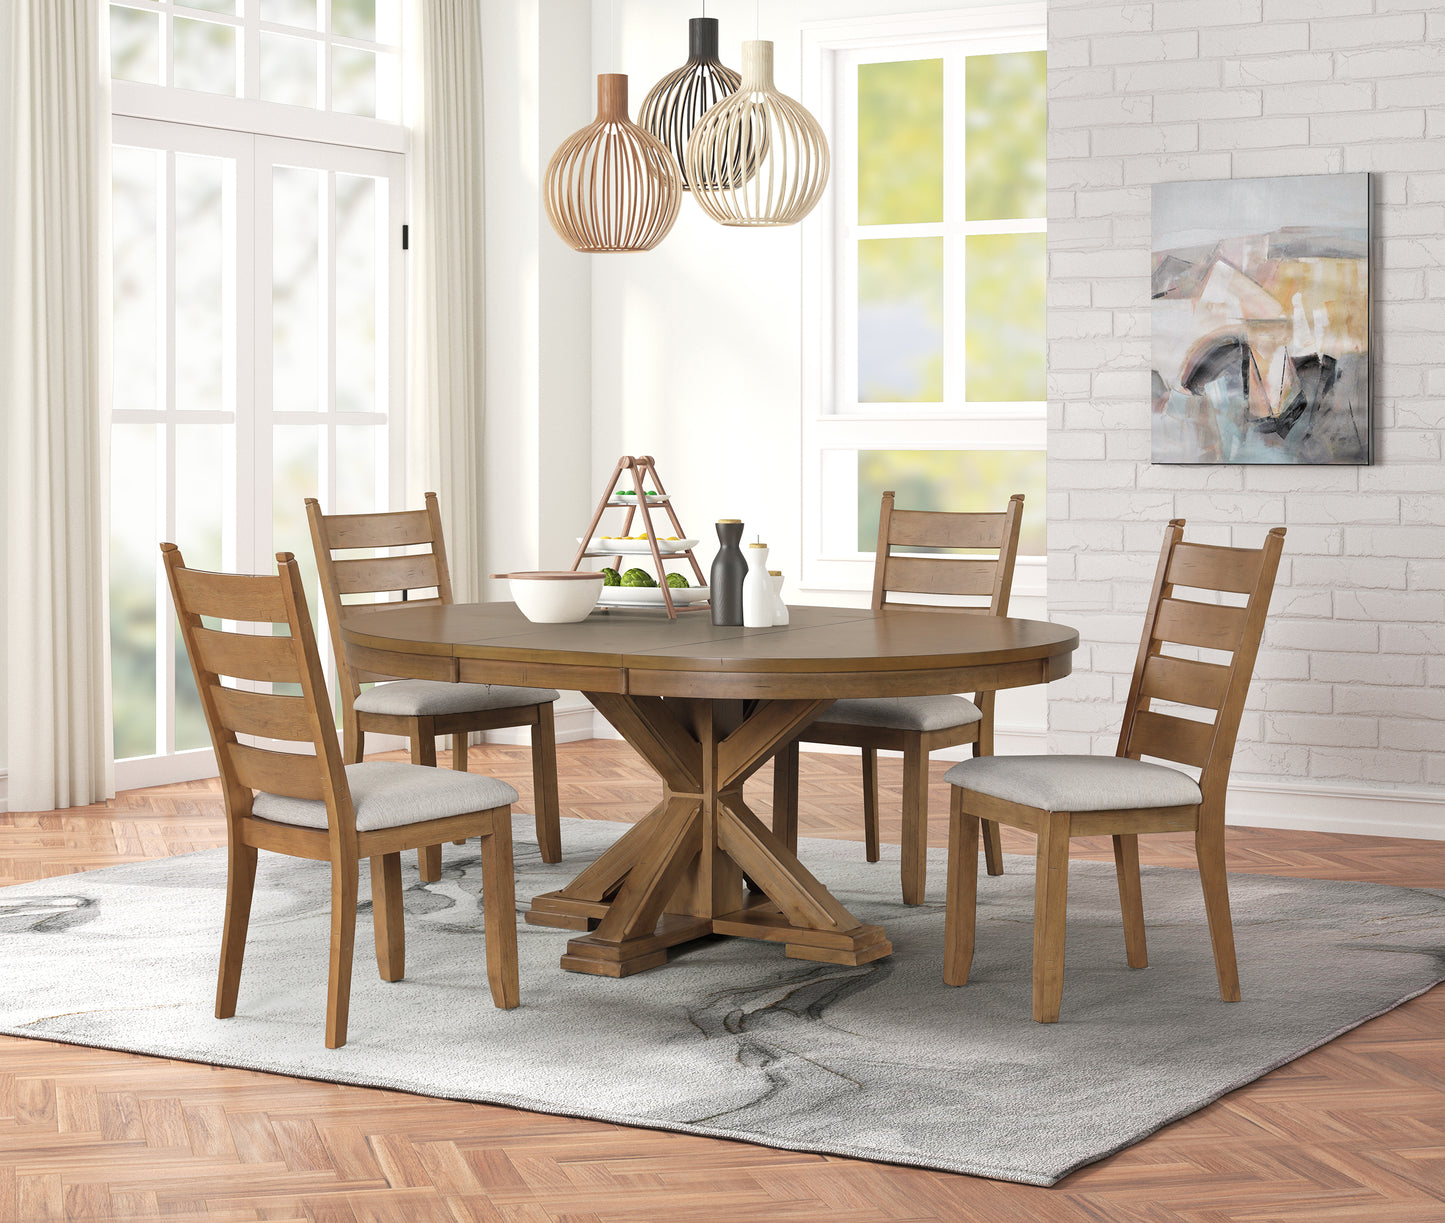 Trina 5 Piece Round/Oval Dining Set All Natural